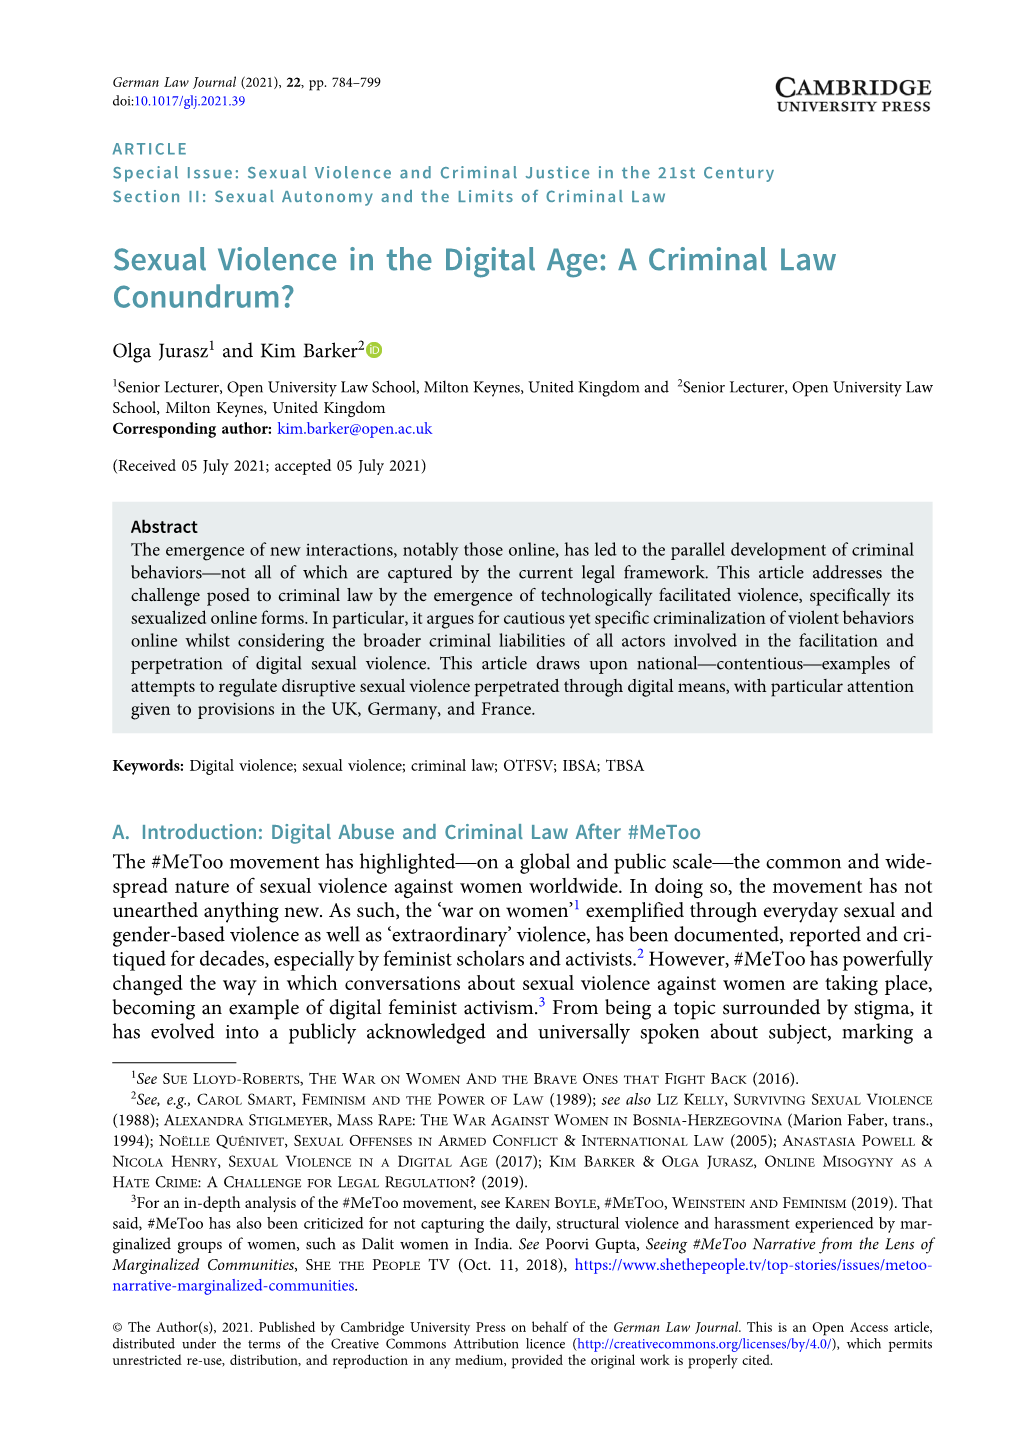 Sexual Violence in the Digital Age: a Criminal Law Conundrum?